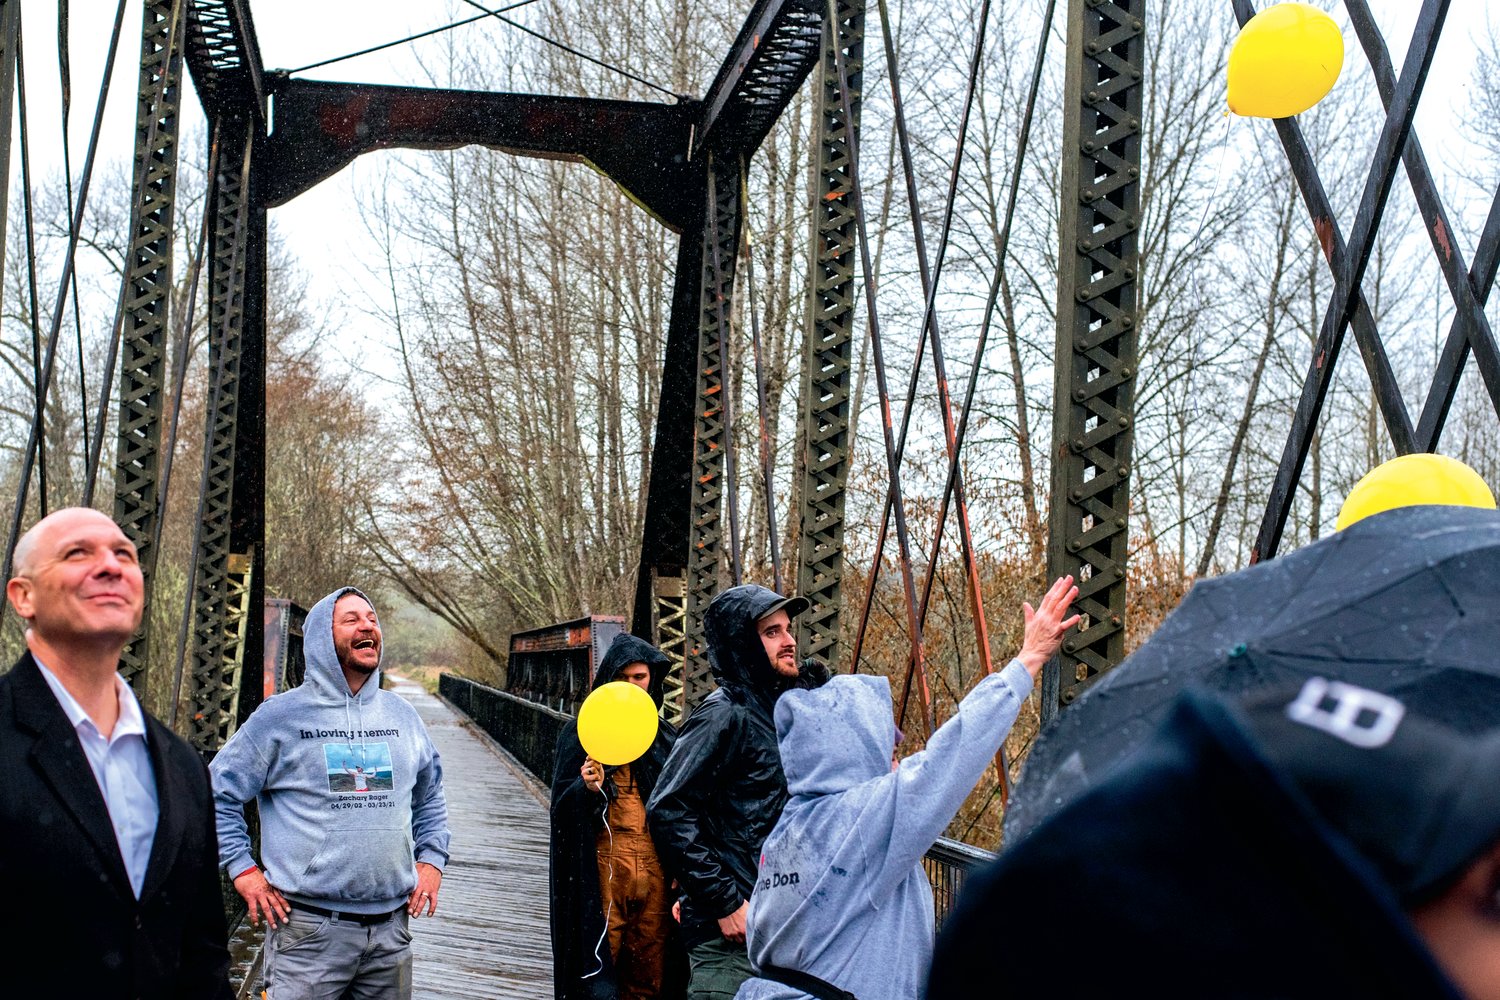 State Rep. Peter Abbarno and Lee Hines, the stepfather of Zachary Rager, smile as balloons are released Wednesday afternoon along the Willapa Trail.